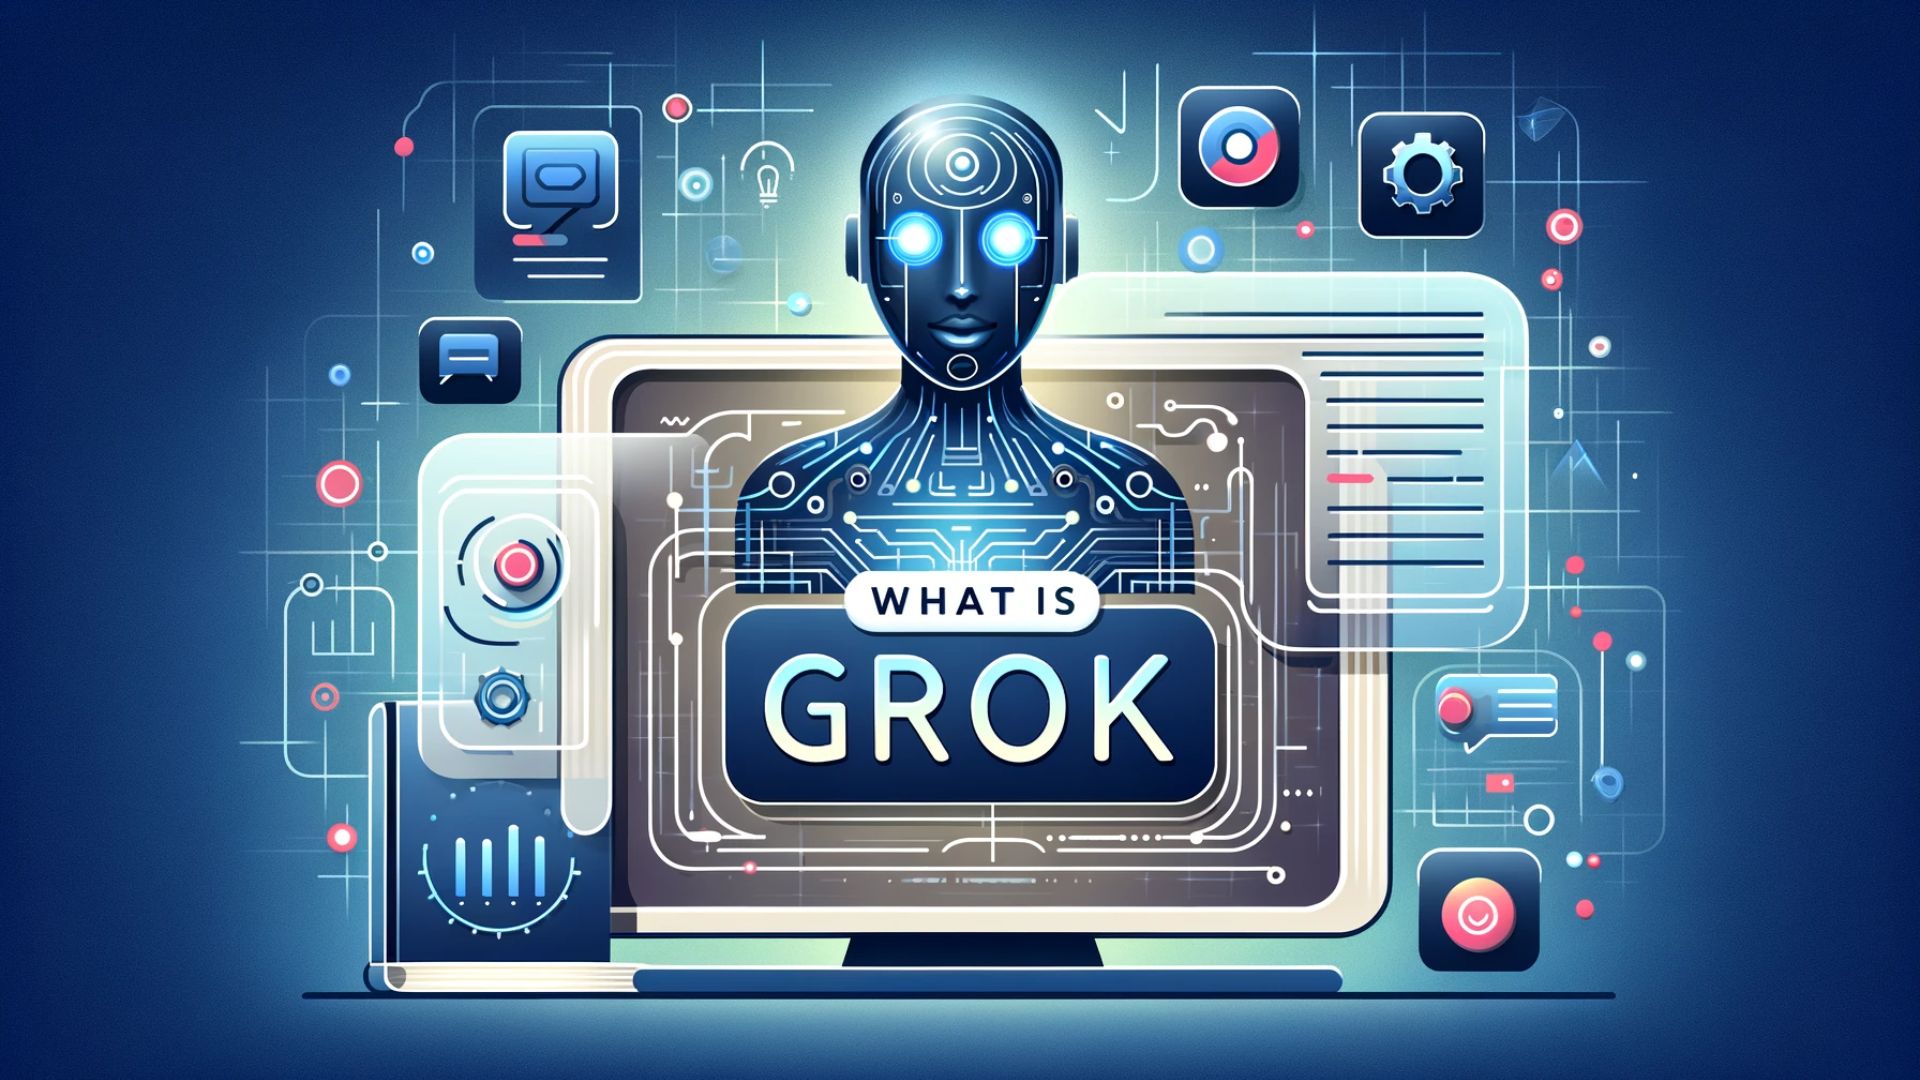 Learn the Latest About Grok by Elon Musk